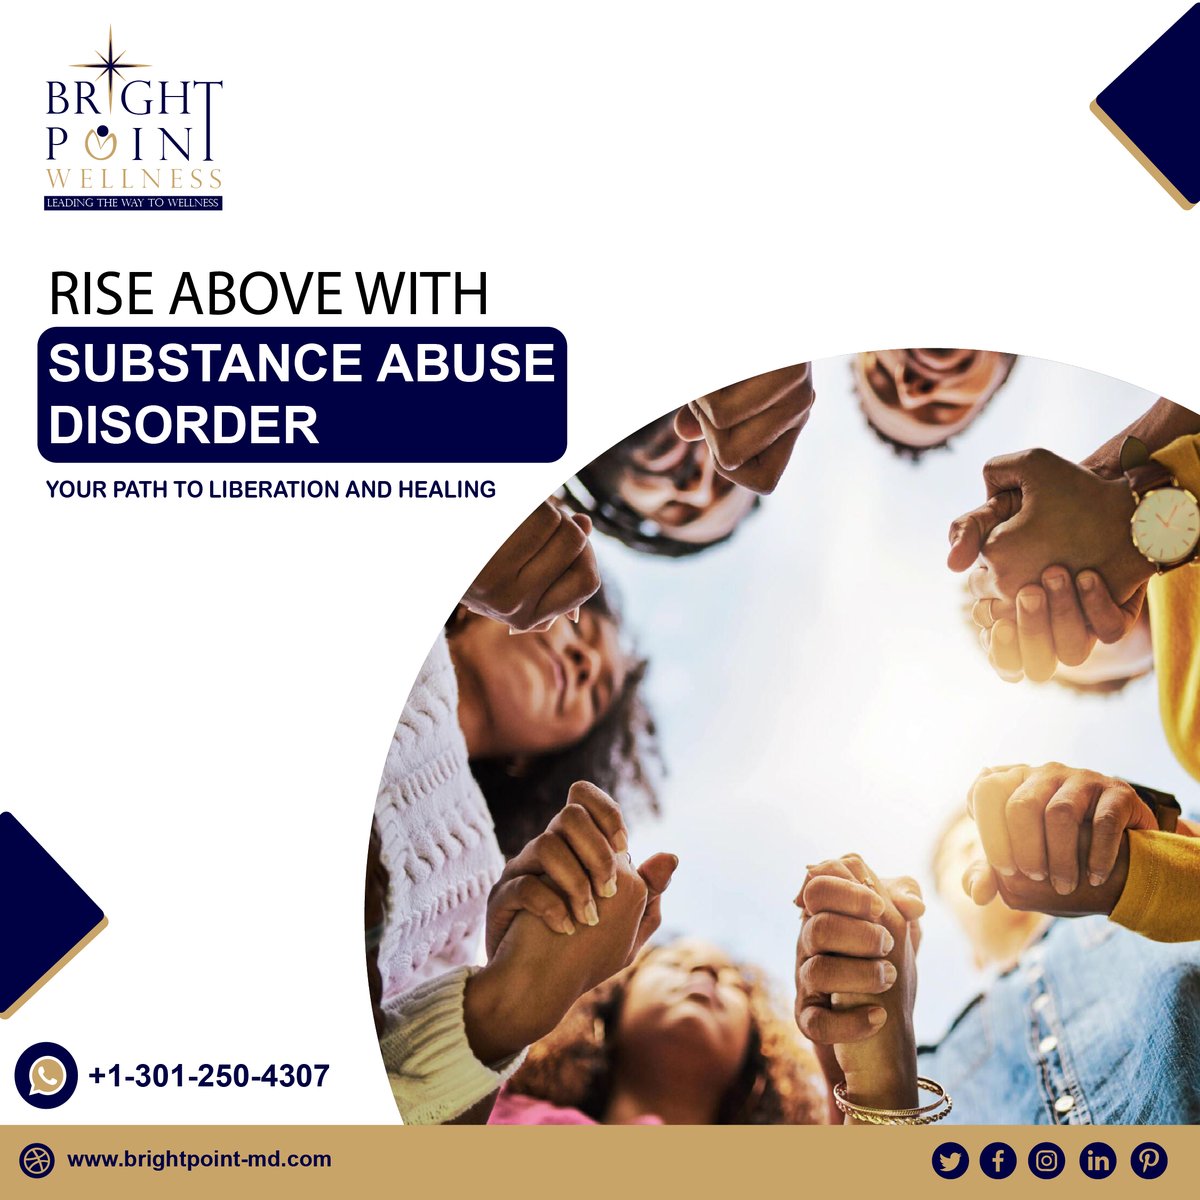 Navigating the challenges of substance abuse disorder? Find support, information, and hope with our comprehensive resources. #BreakFreeFromAddiction #RecoveryMatters #EndTheStigma #HopeInRecovery #SupportNotJudgment #HealingJourney #BreakTheChains #MindfulRecovery #TogetherWeHeal